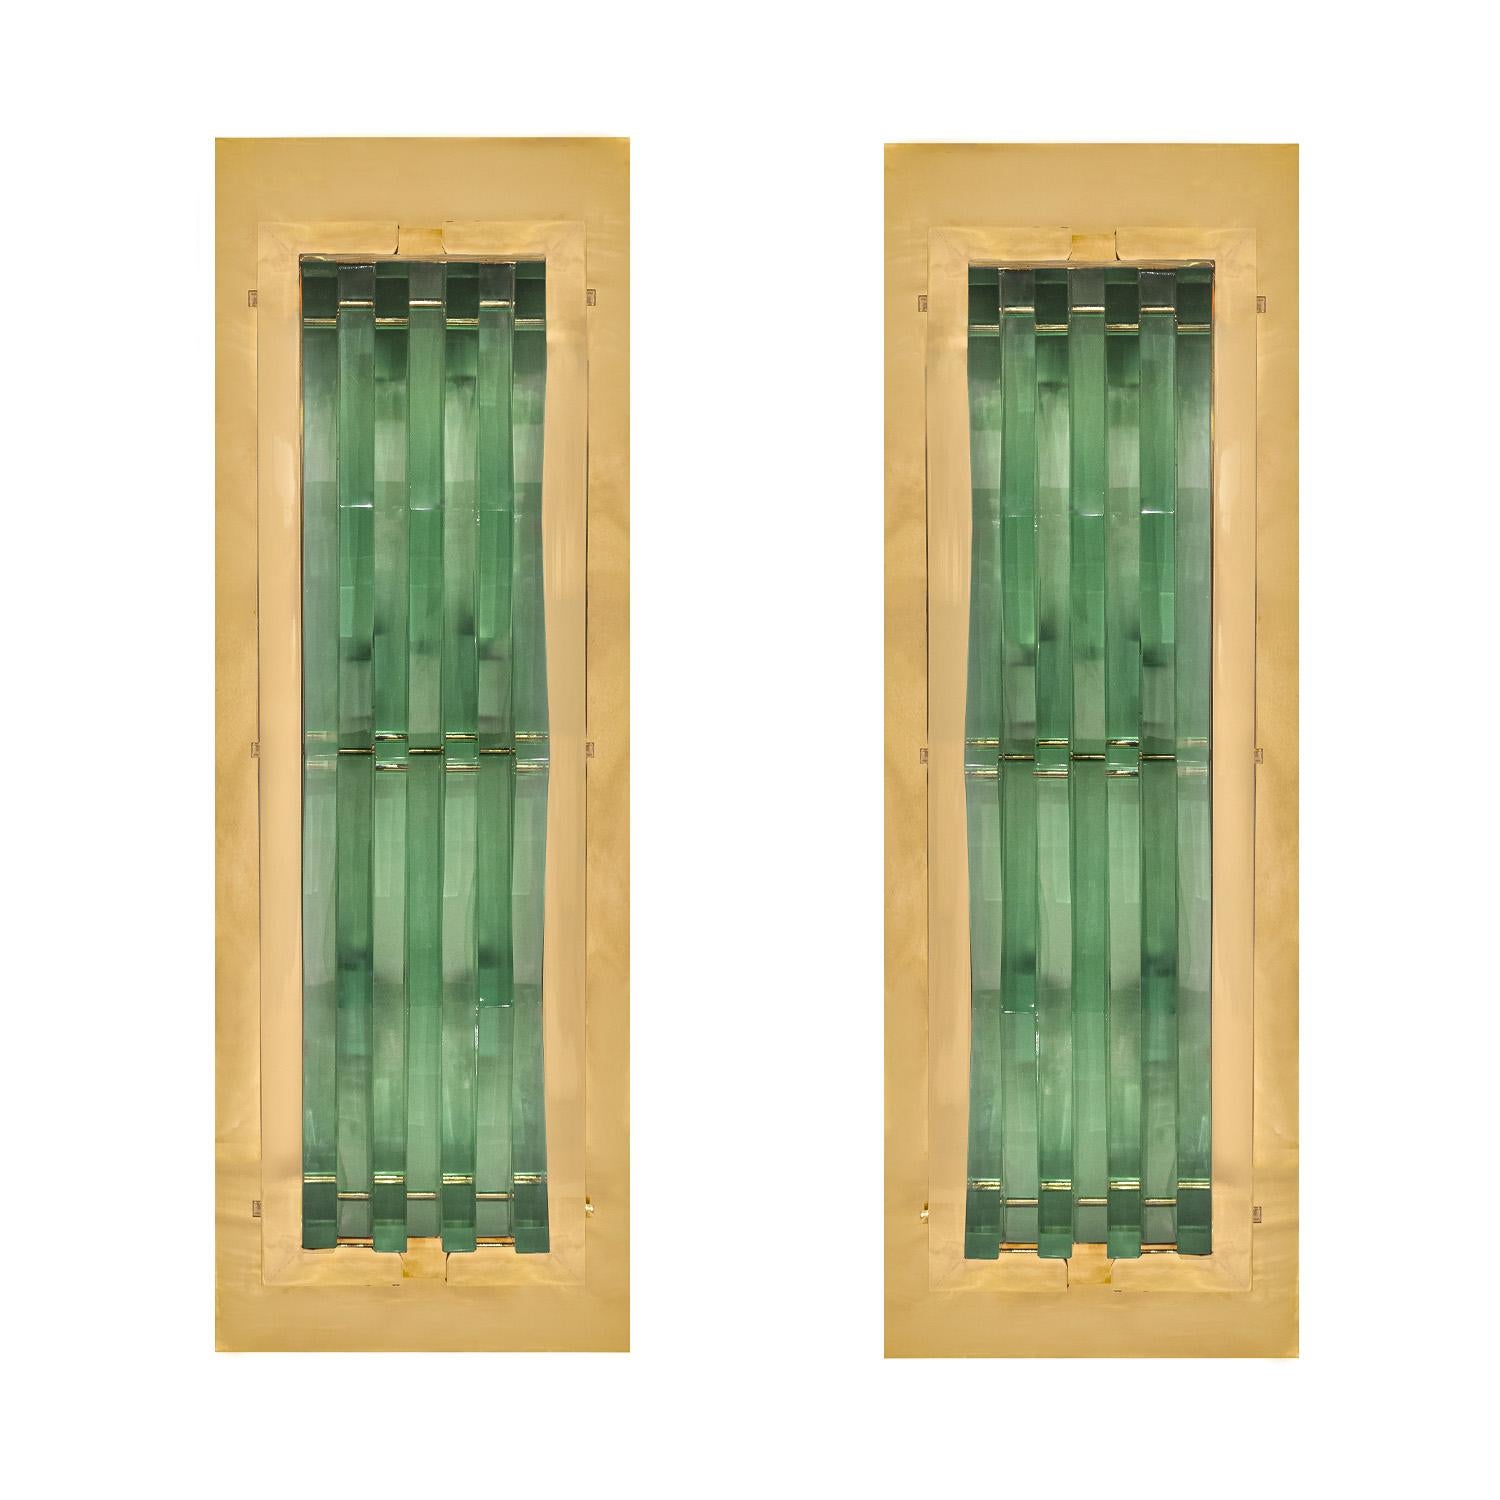 Pair of stunning large wall sconces in polished brass with handcut angular glass inserts by Max Ingrand for Fontana Arte, Italy 1950s. These sconces have been polished, lacquered and newly rewired. 

Reference:
Fontana Arte: Gio Ponti, Pietro